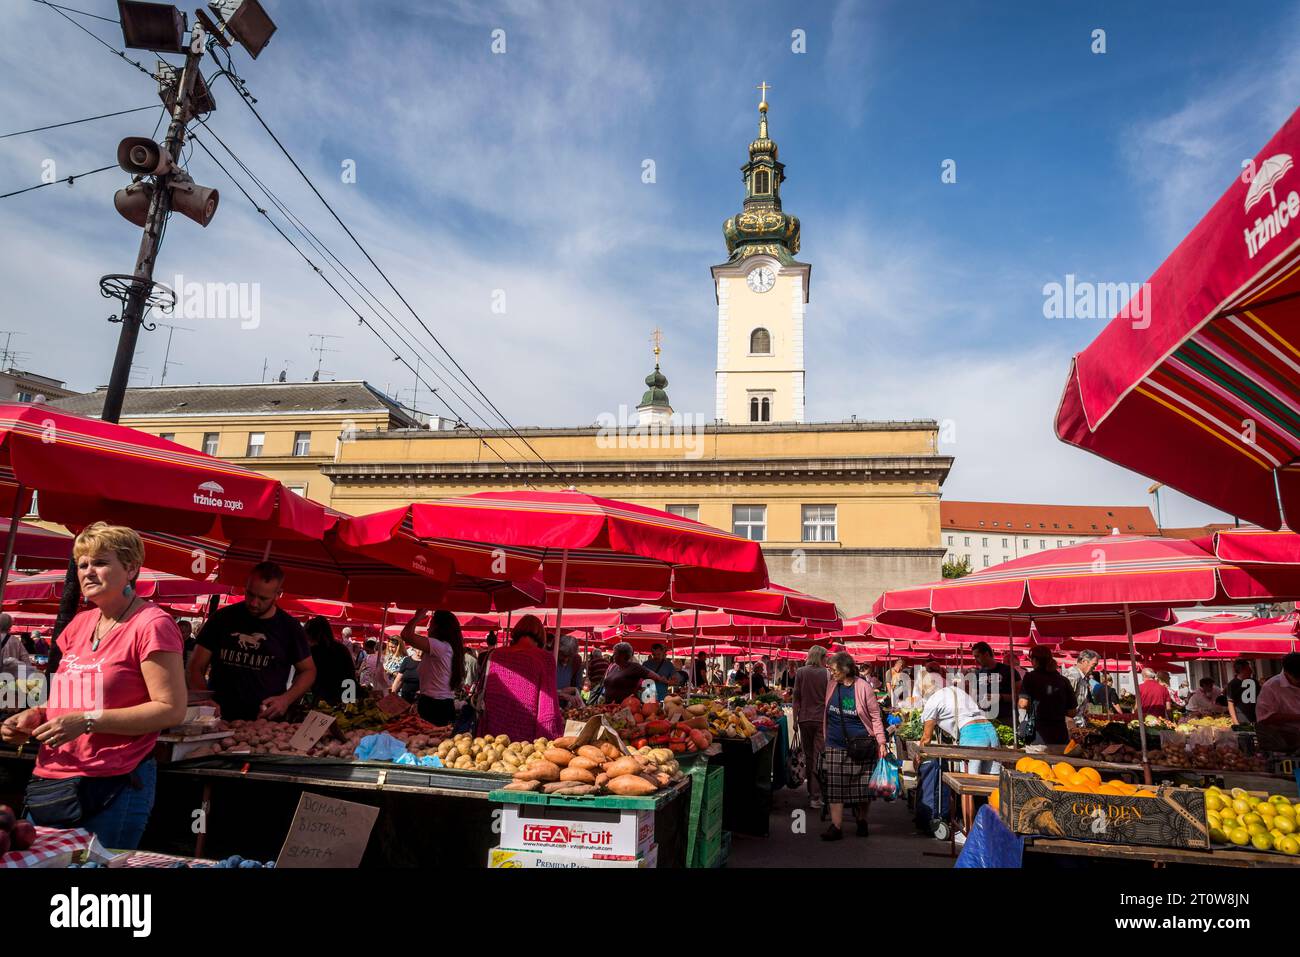 Dolac Market, traditional fruit and vegetable market, and the Baroque church tower of St Mary's Church, Zagreb, Croatia Stock Photo